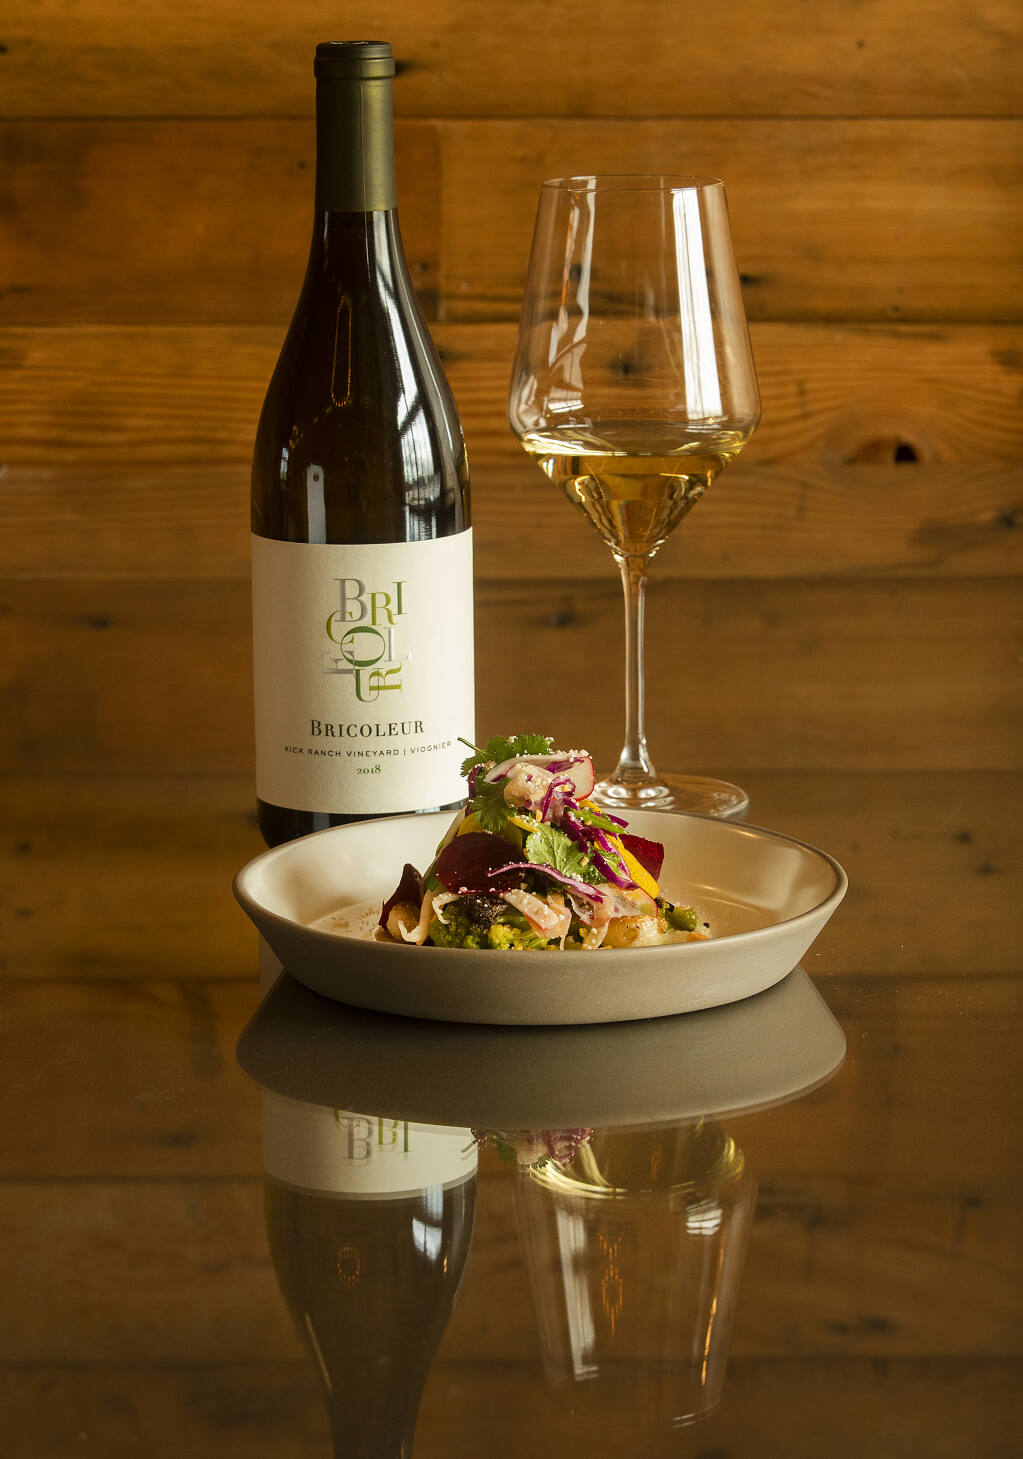 Citrus Spiced Vegetables are paired with the Bricoleur 2018 Kick Ranch Vineyard Viognier from Chef Shane McAnelly's tasting menu at the new Bricoleur Vineyards in Windsor on Thursday, Feb. 18, 2021. (John Burgess / The Press Democrat)